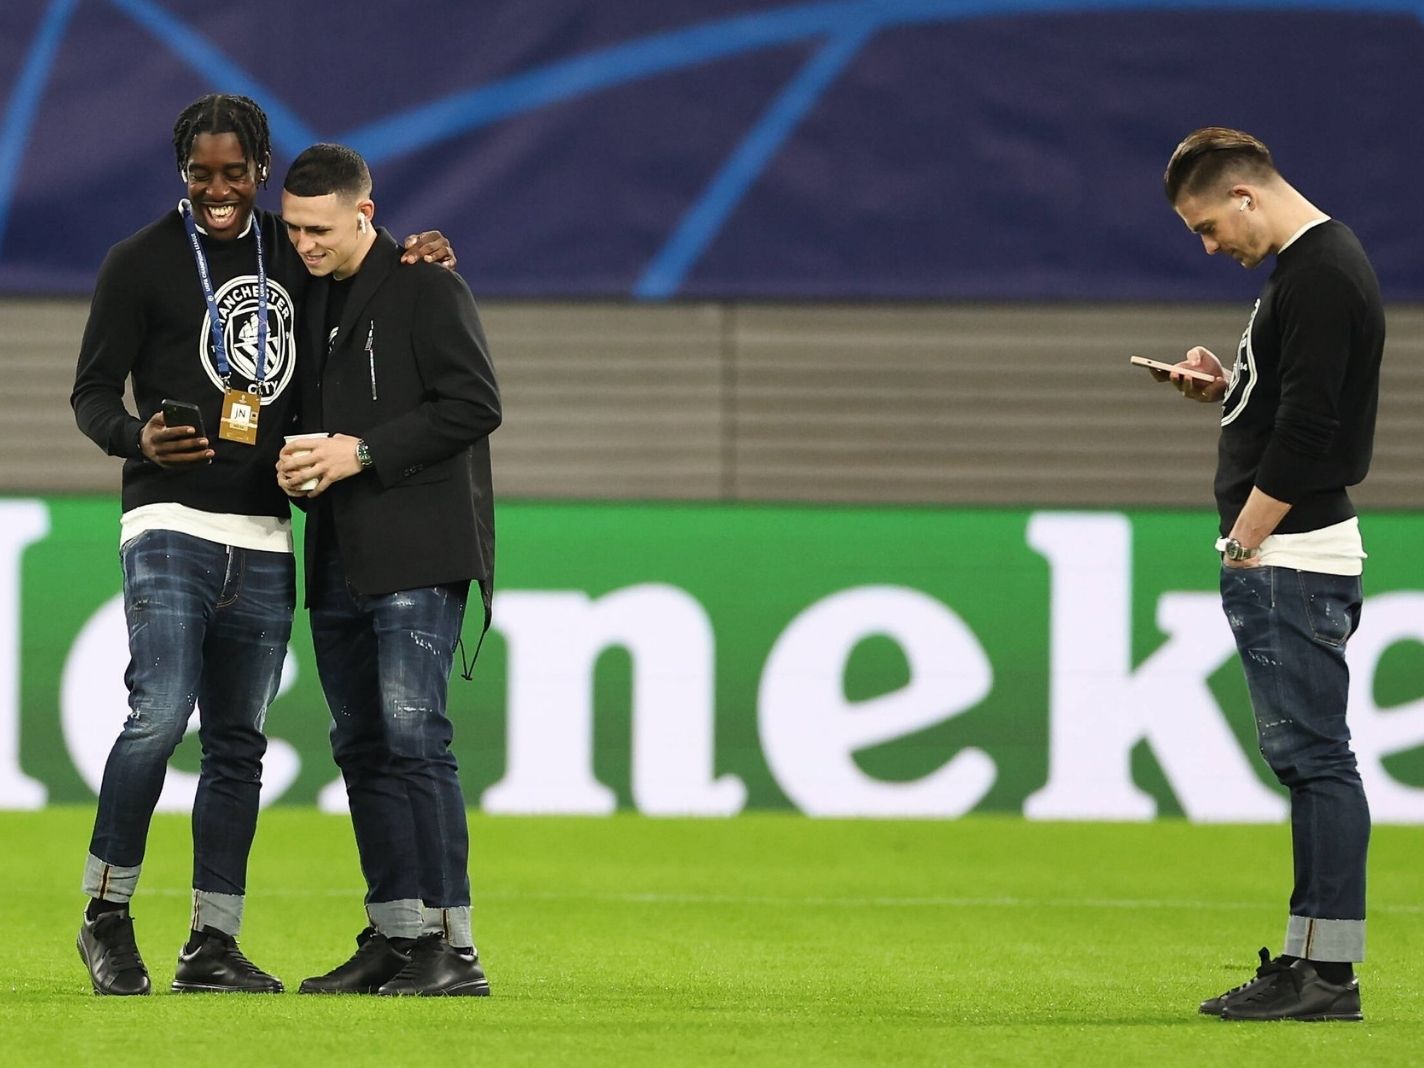 Man City slammed for turning up to Champions League game in cuffed jeans